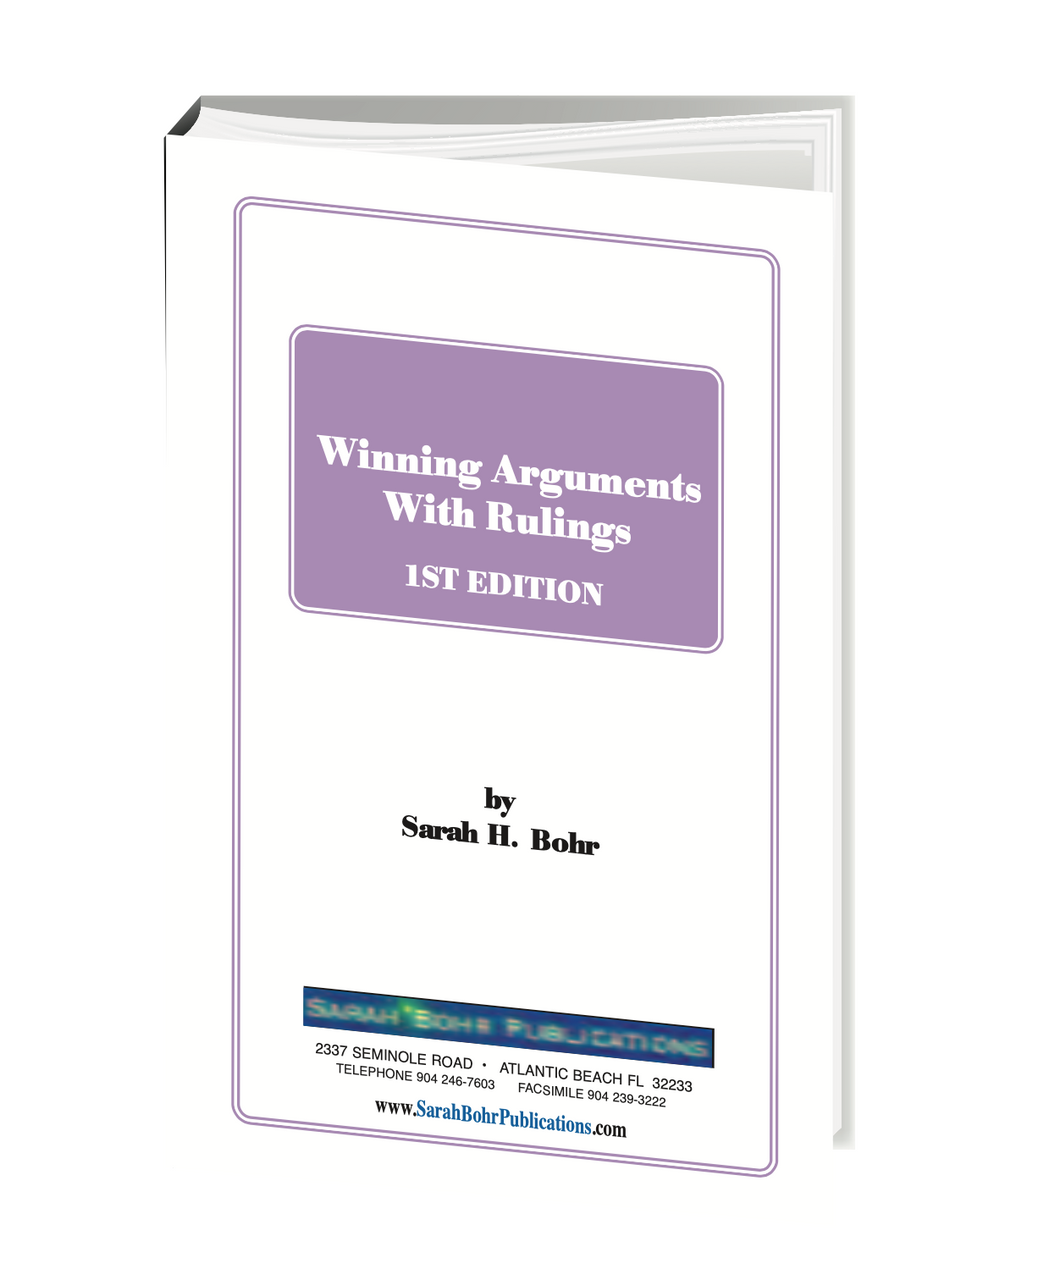 *NEW* Winning Arguments with Rulings - 1st Edition (Digital Download + Physical Book)